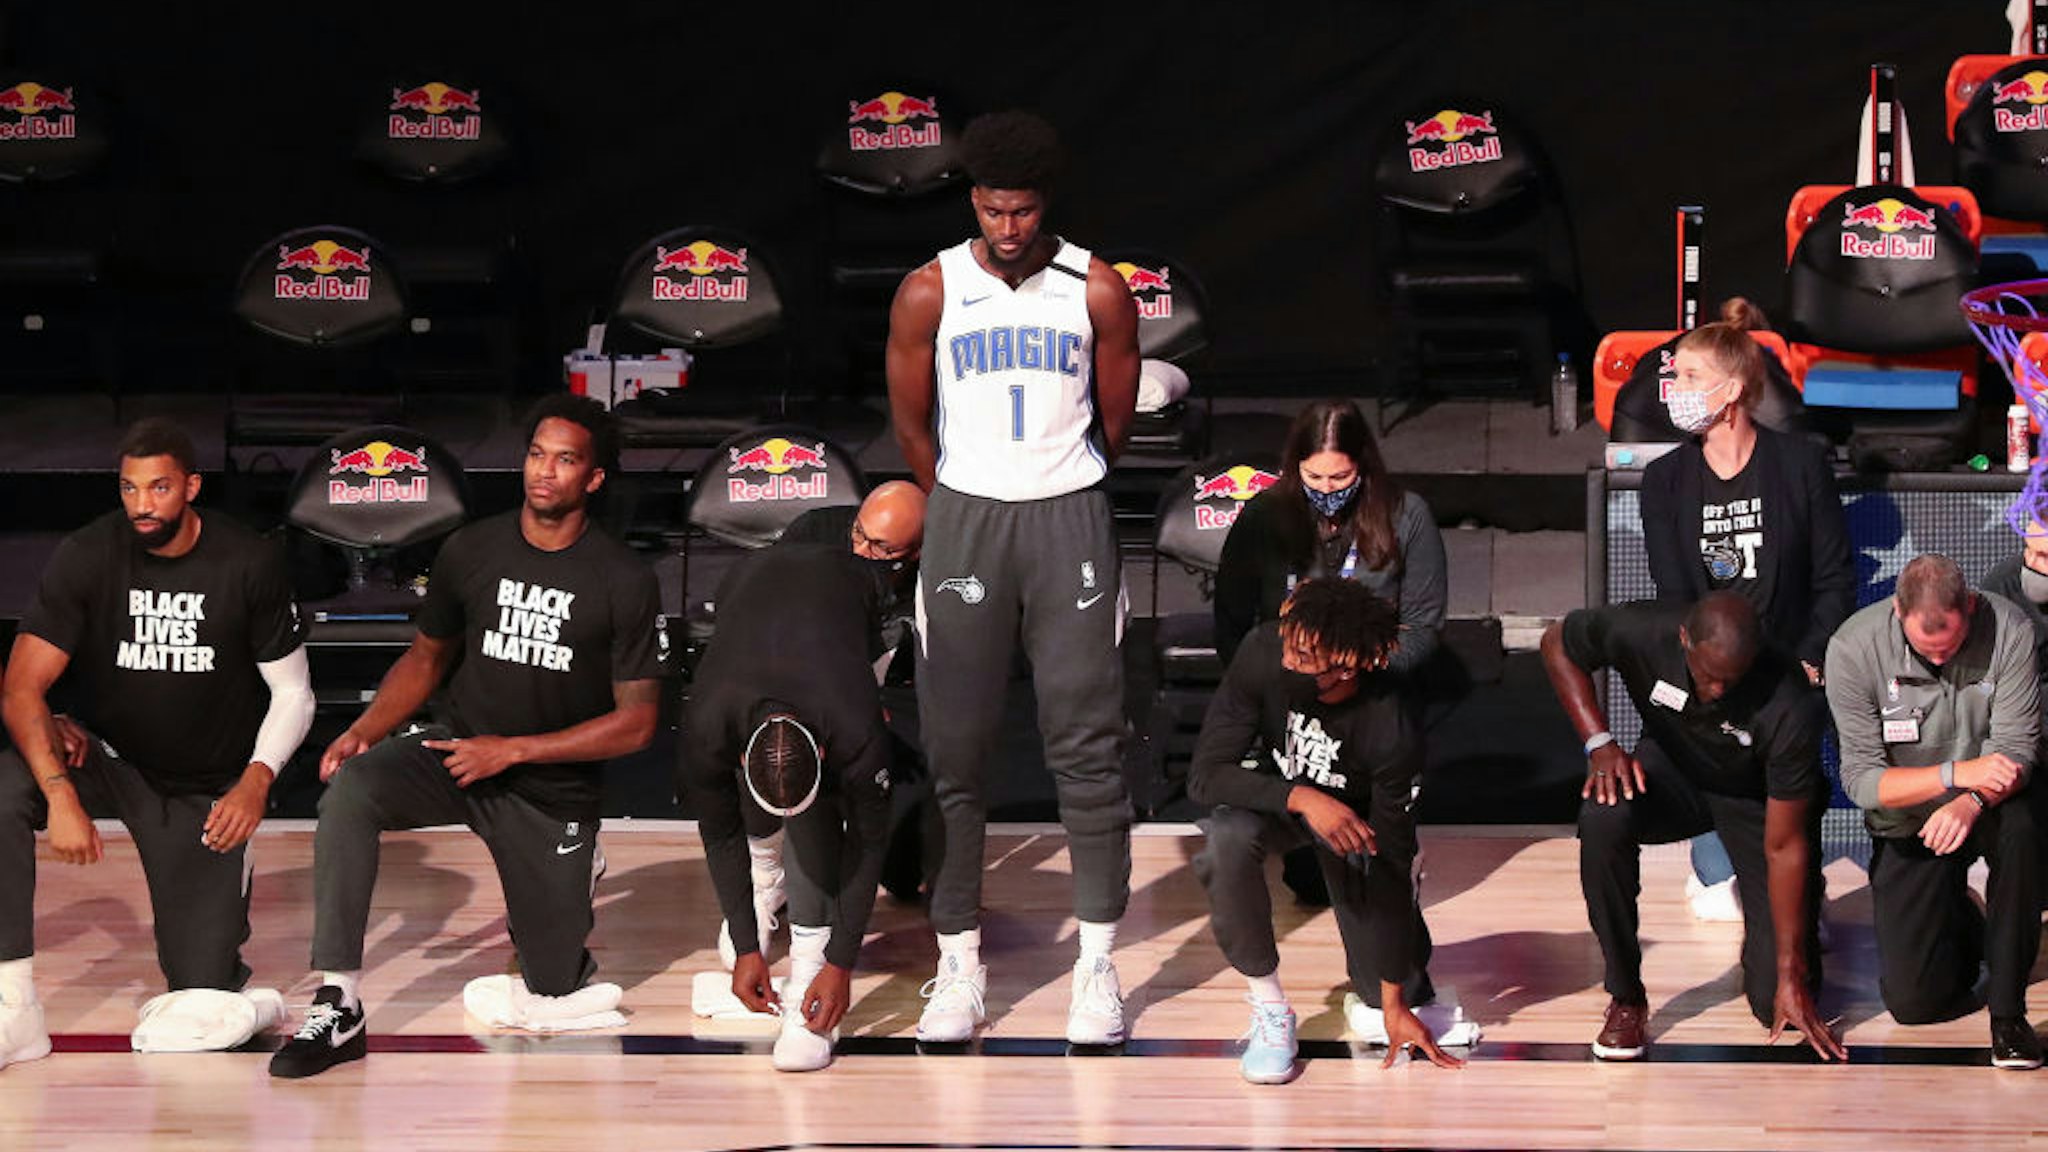 Orlando Magic forward Jonathan Isaac (1) is the lone player to stand and not wear a "Black Lives Matter" t-shirt prior to a game against the Brooklyn Nets at Disney's Wide World of Sports' HP Field House in Lake Buena Vista, Florida, on Friday, July 31, 2020. (Charles King/Orlando Sentinel/Tribune News Service via Getty Images)